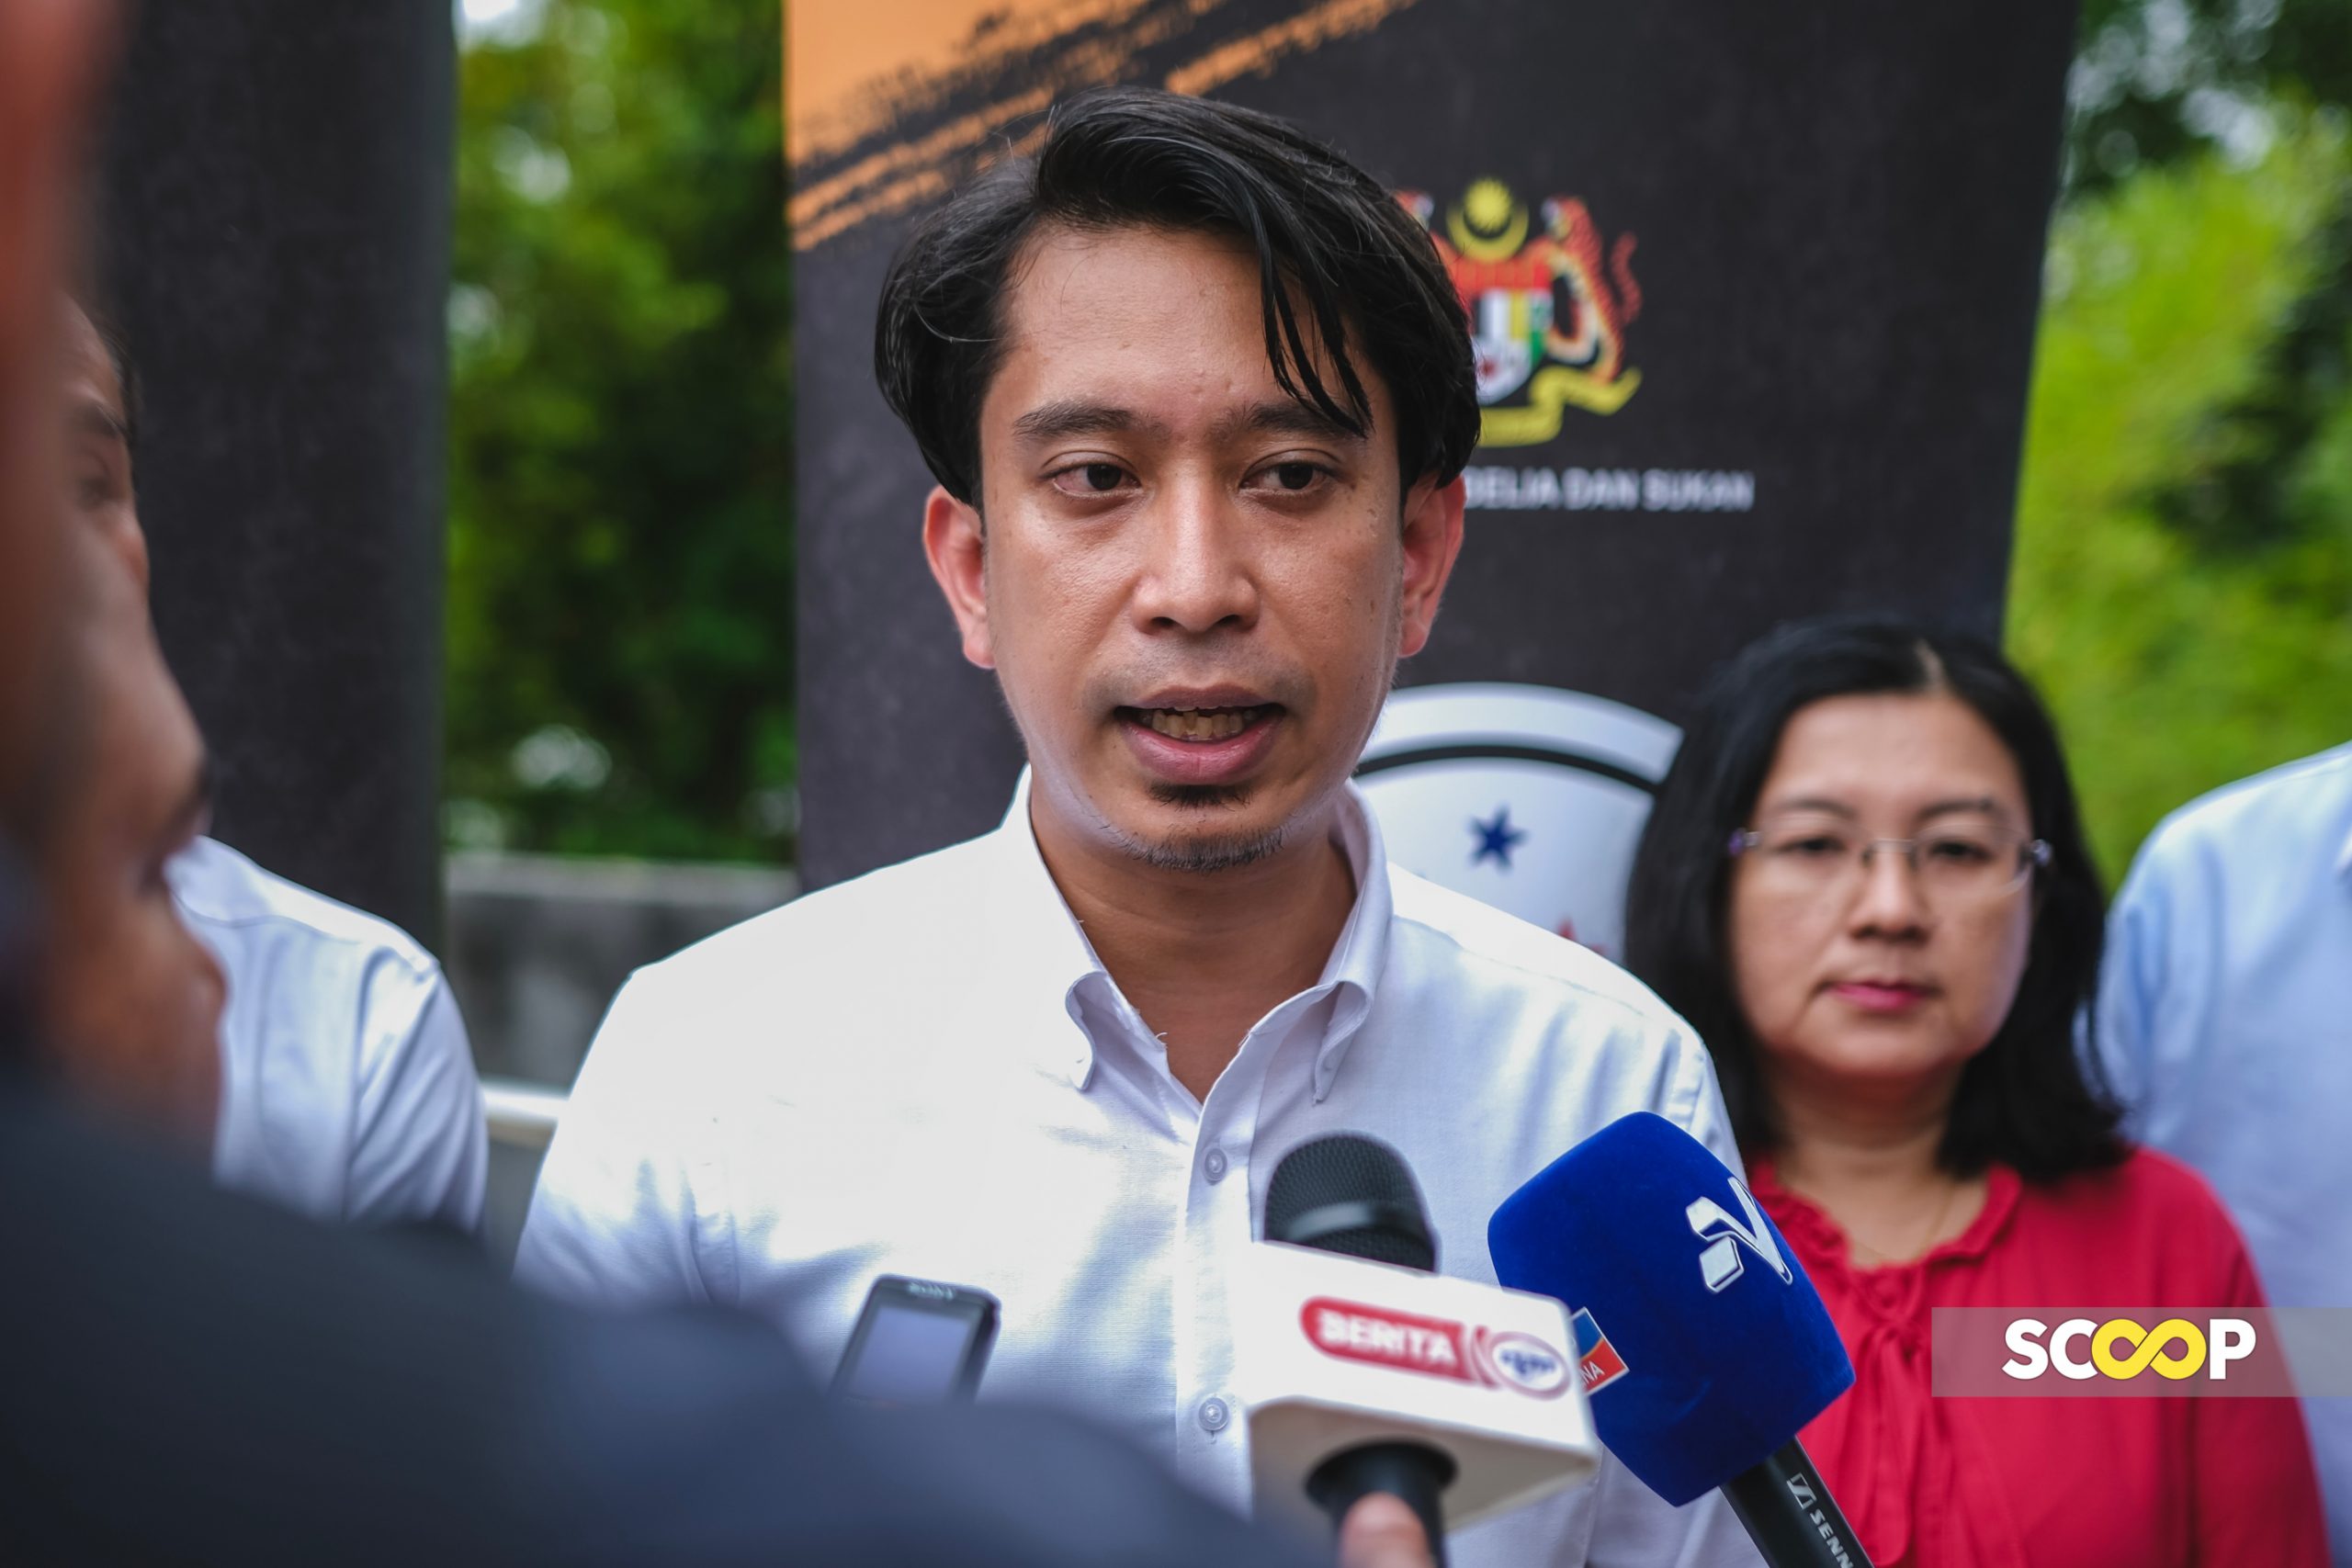 Referee assault: Adam Adli calls for unified commitment to Safe Sport Code